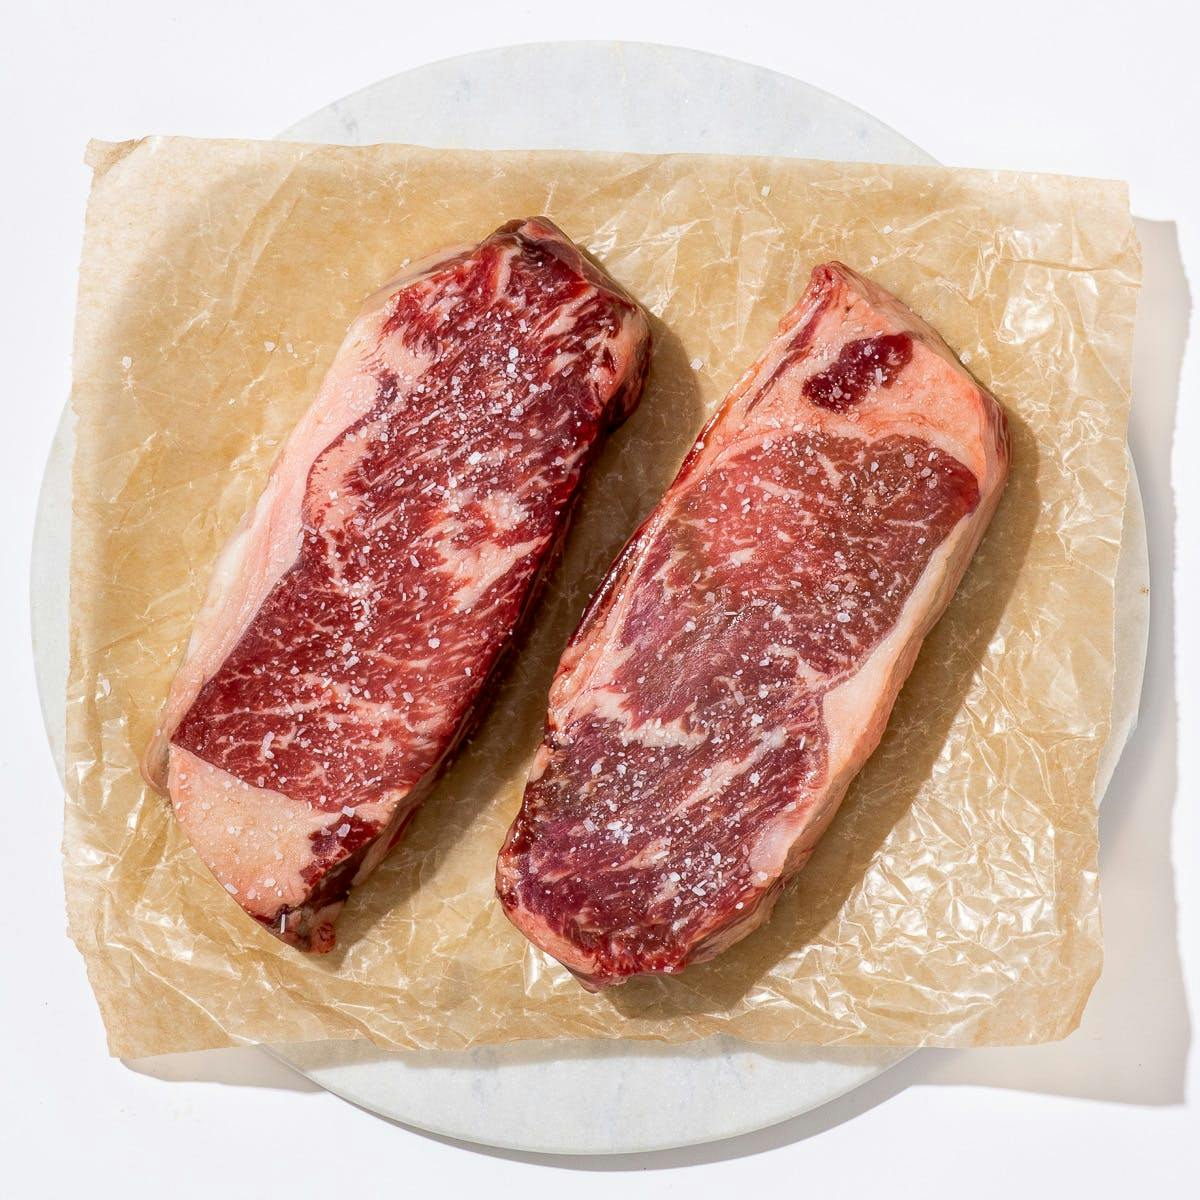 Visit our online shop California Reserve Ribeye Steaks Gift Box, steak gifts